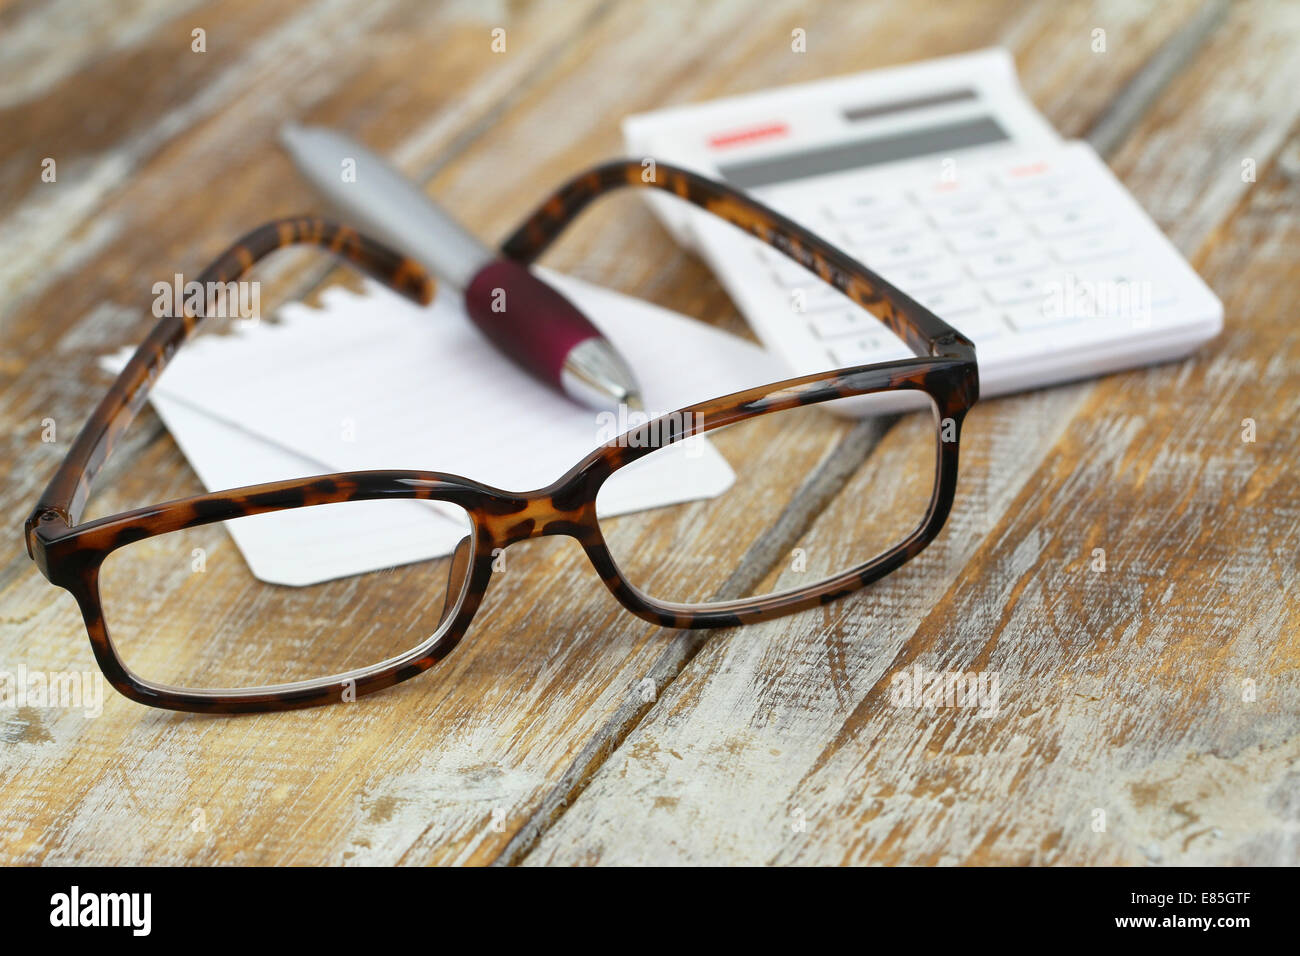 Reading glasses, calculator, pen and note paper on wooden surface Stock Photo